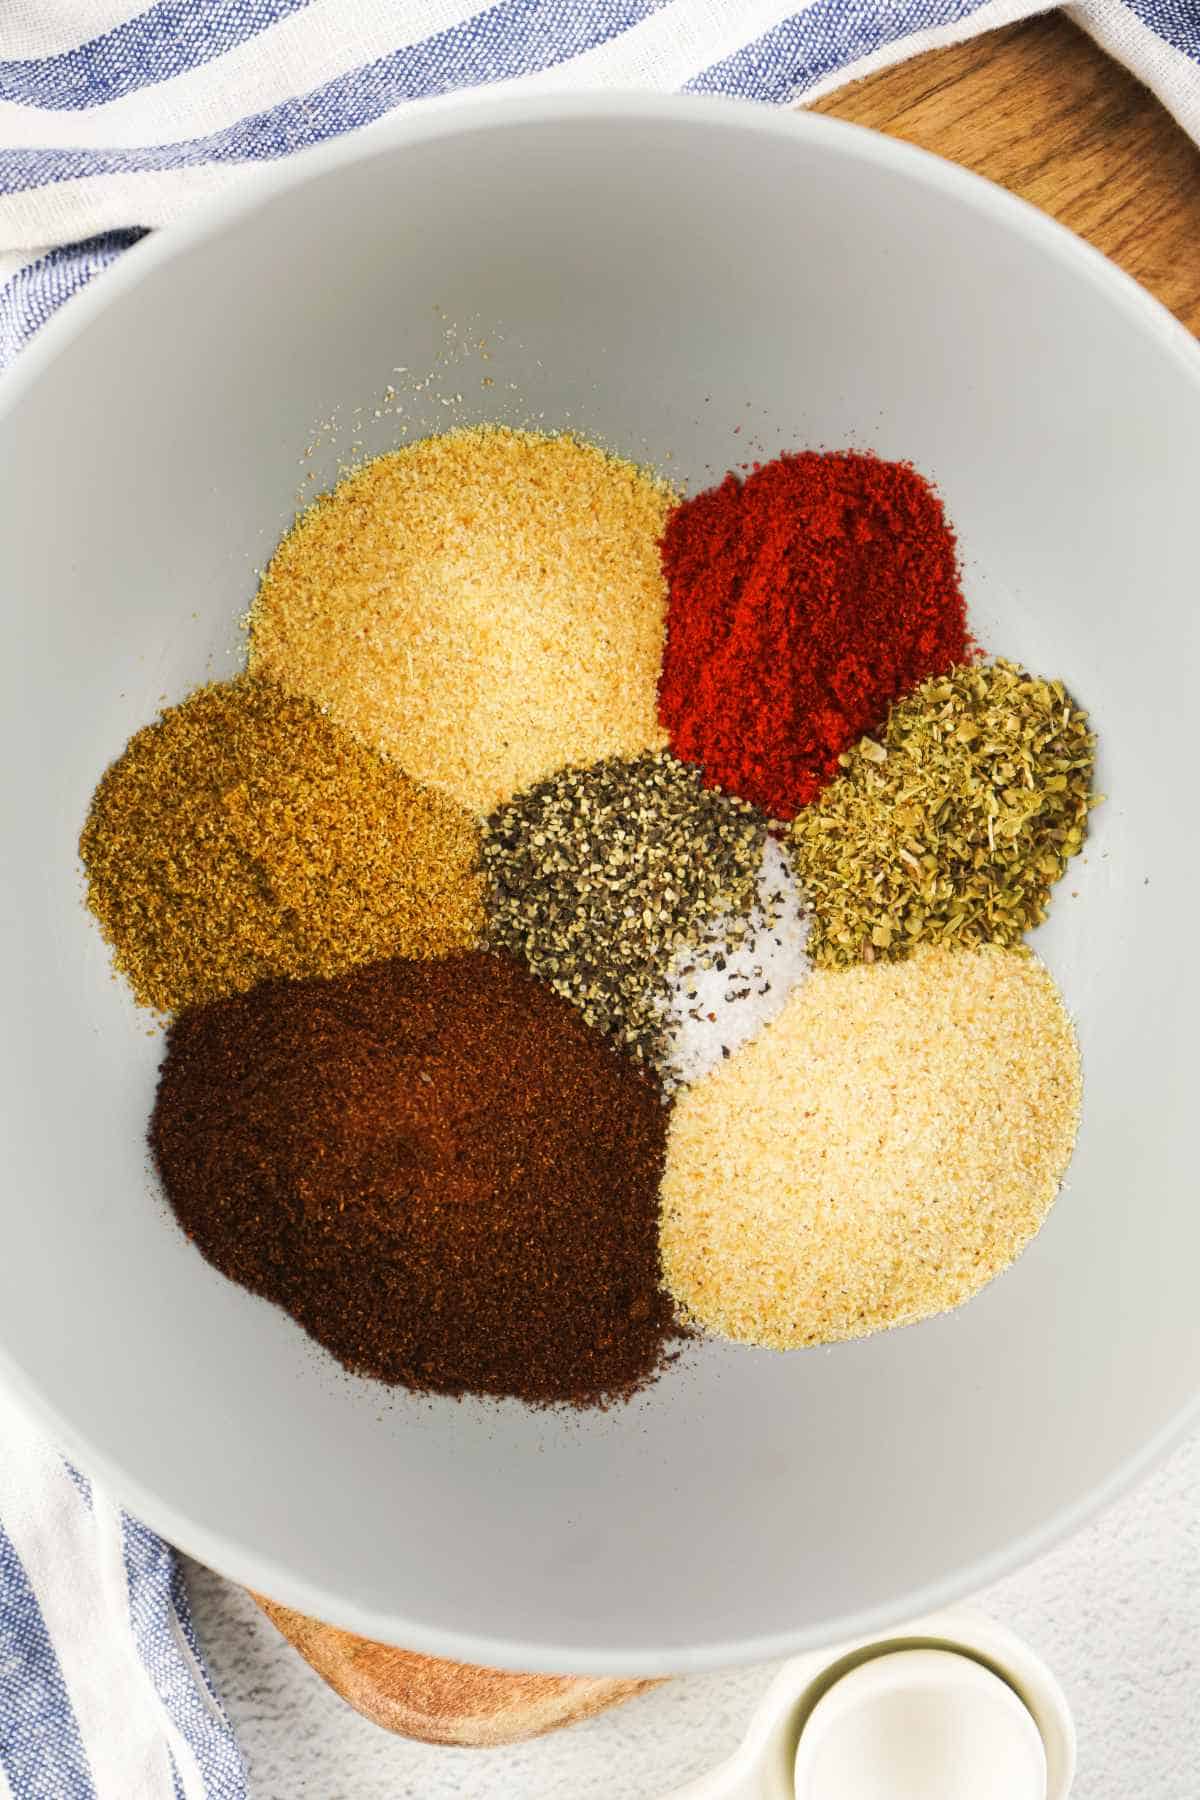 assortment of spices in a white bowl.